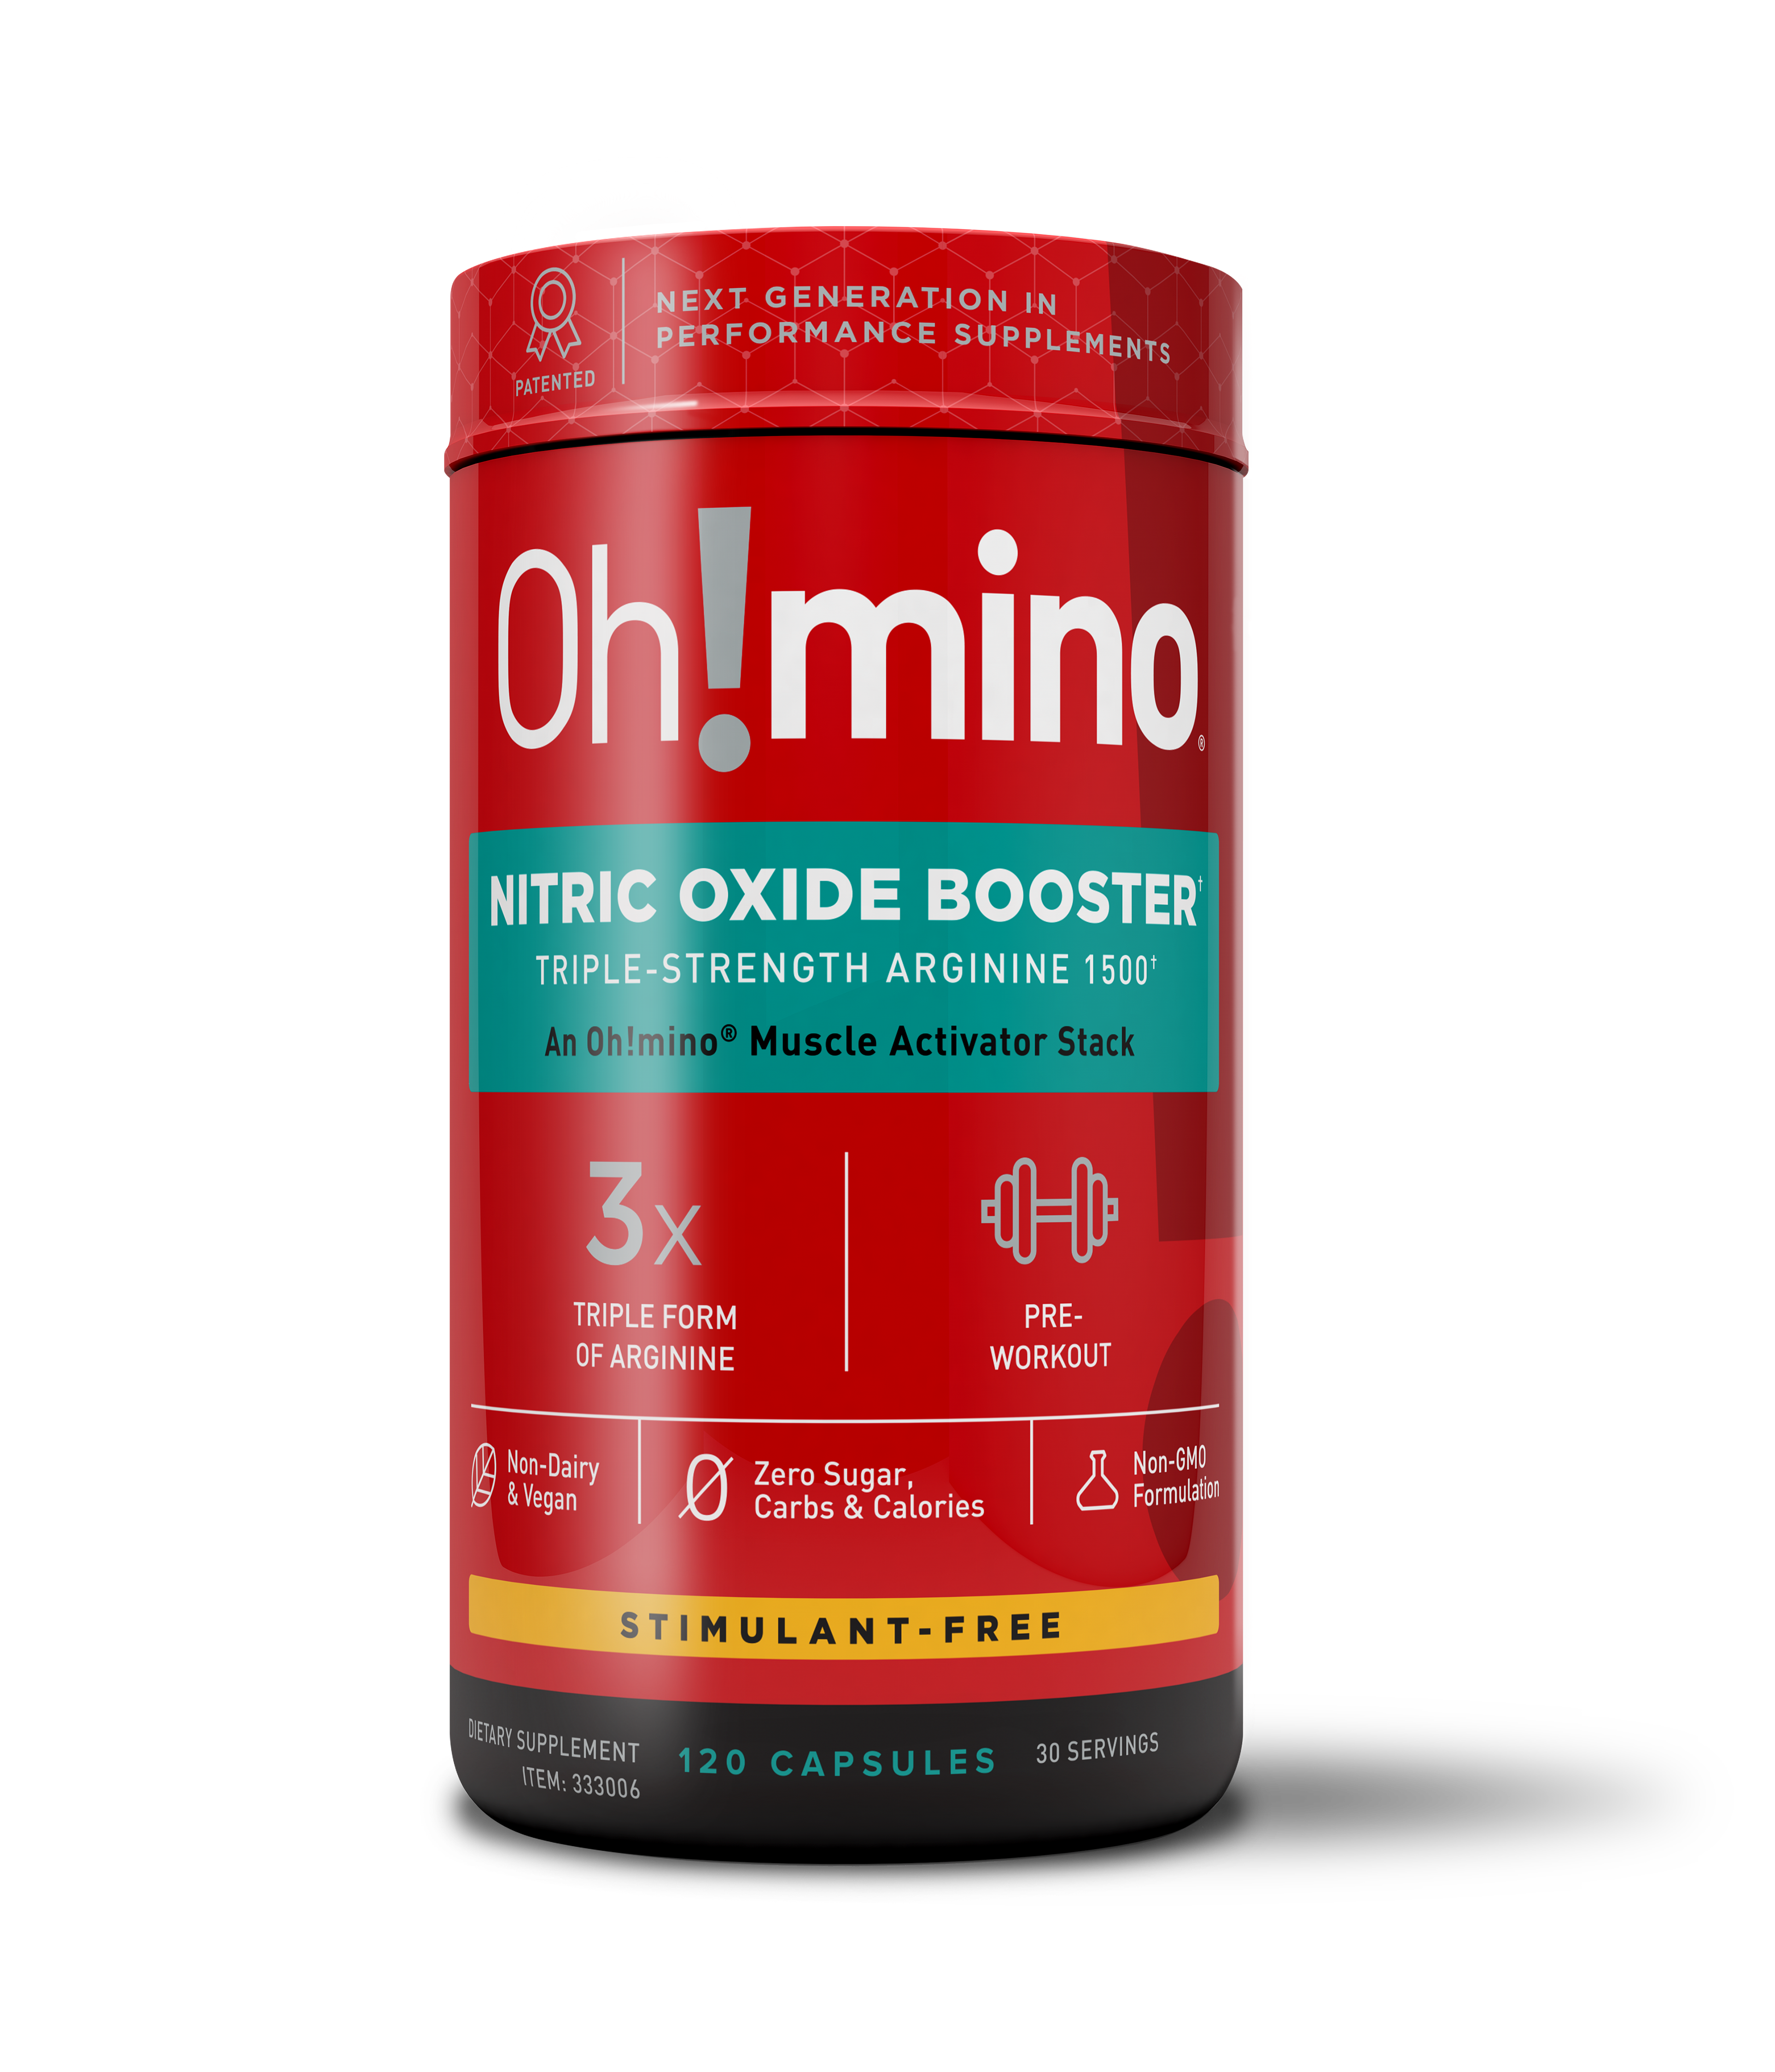 Oh!mino Nitric Oxide Booster